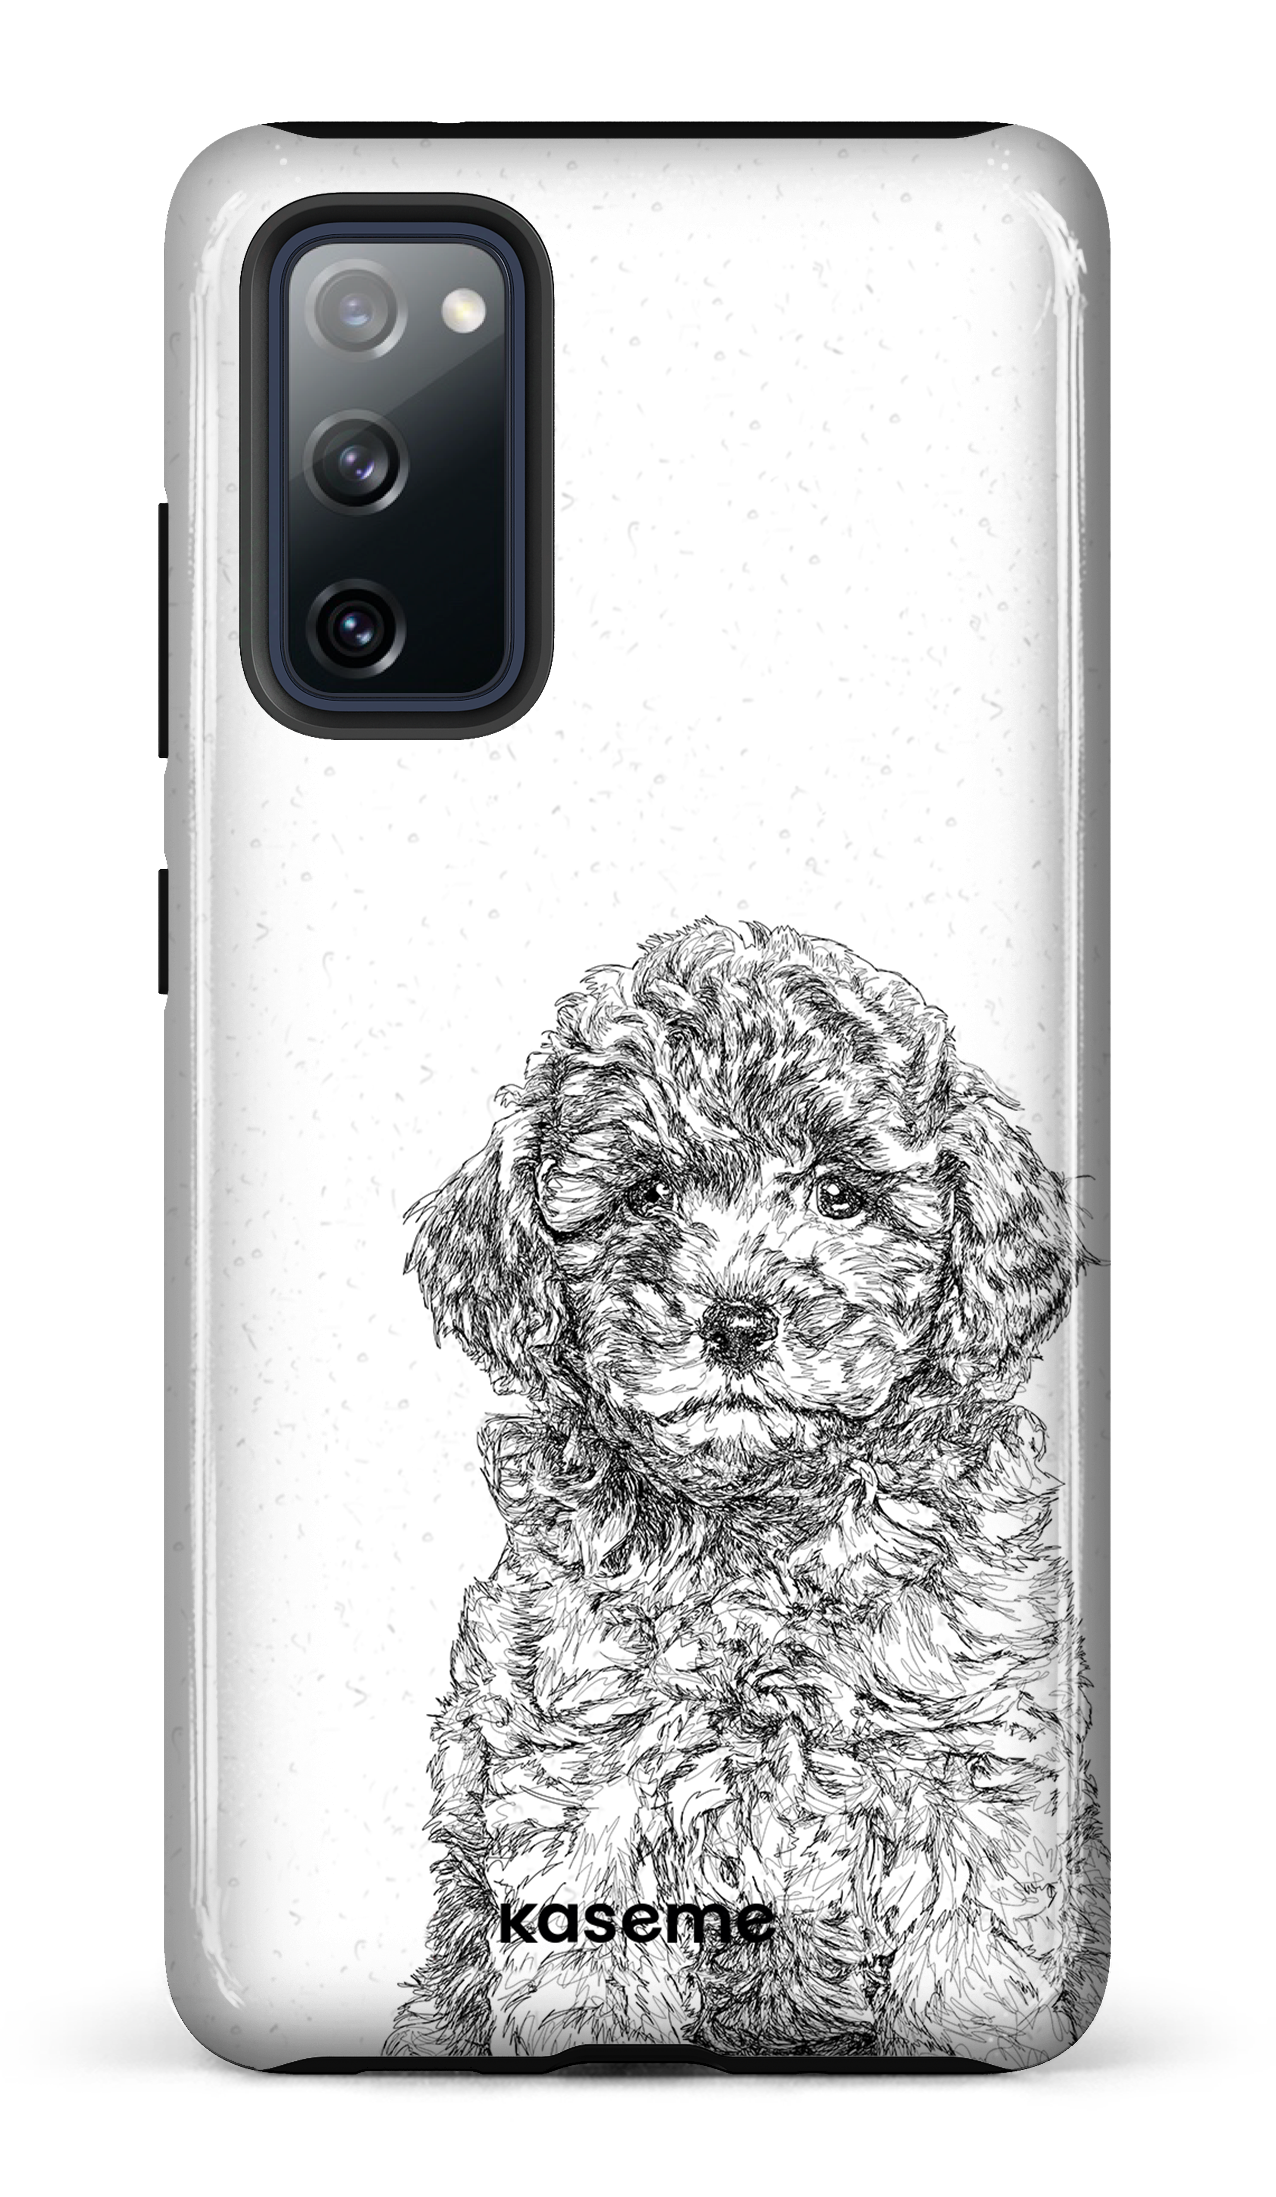 Toy Poodle - Galaxy S20 FE